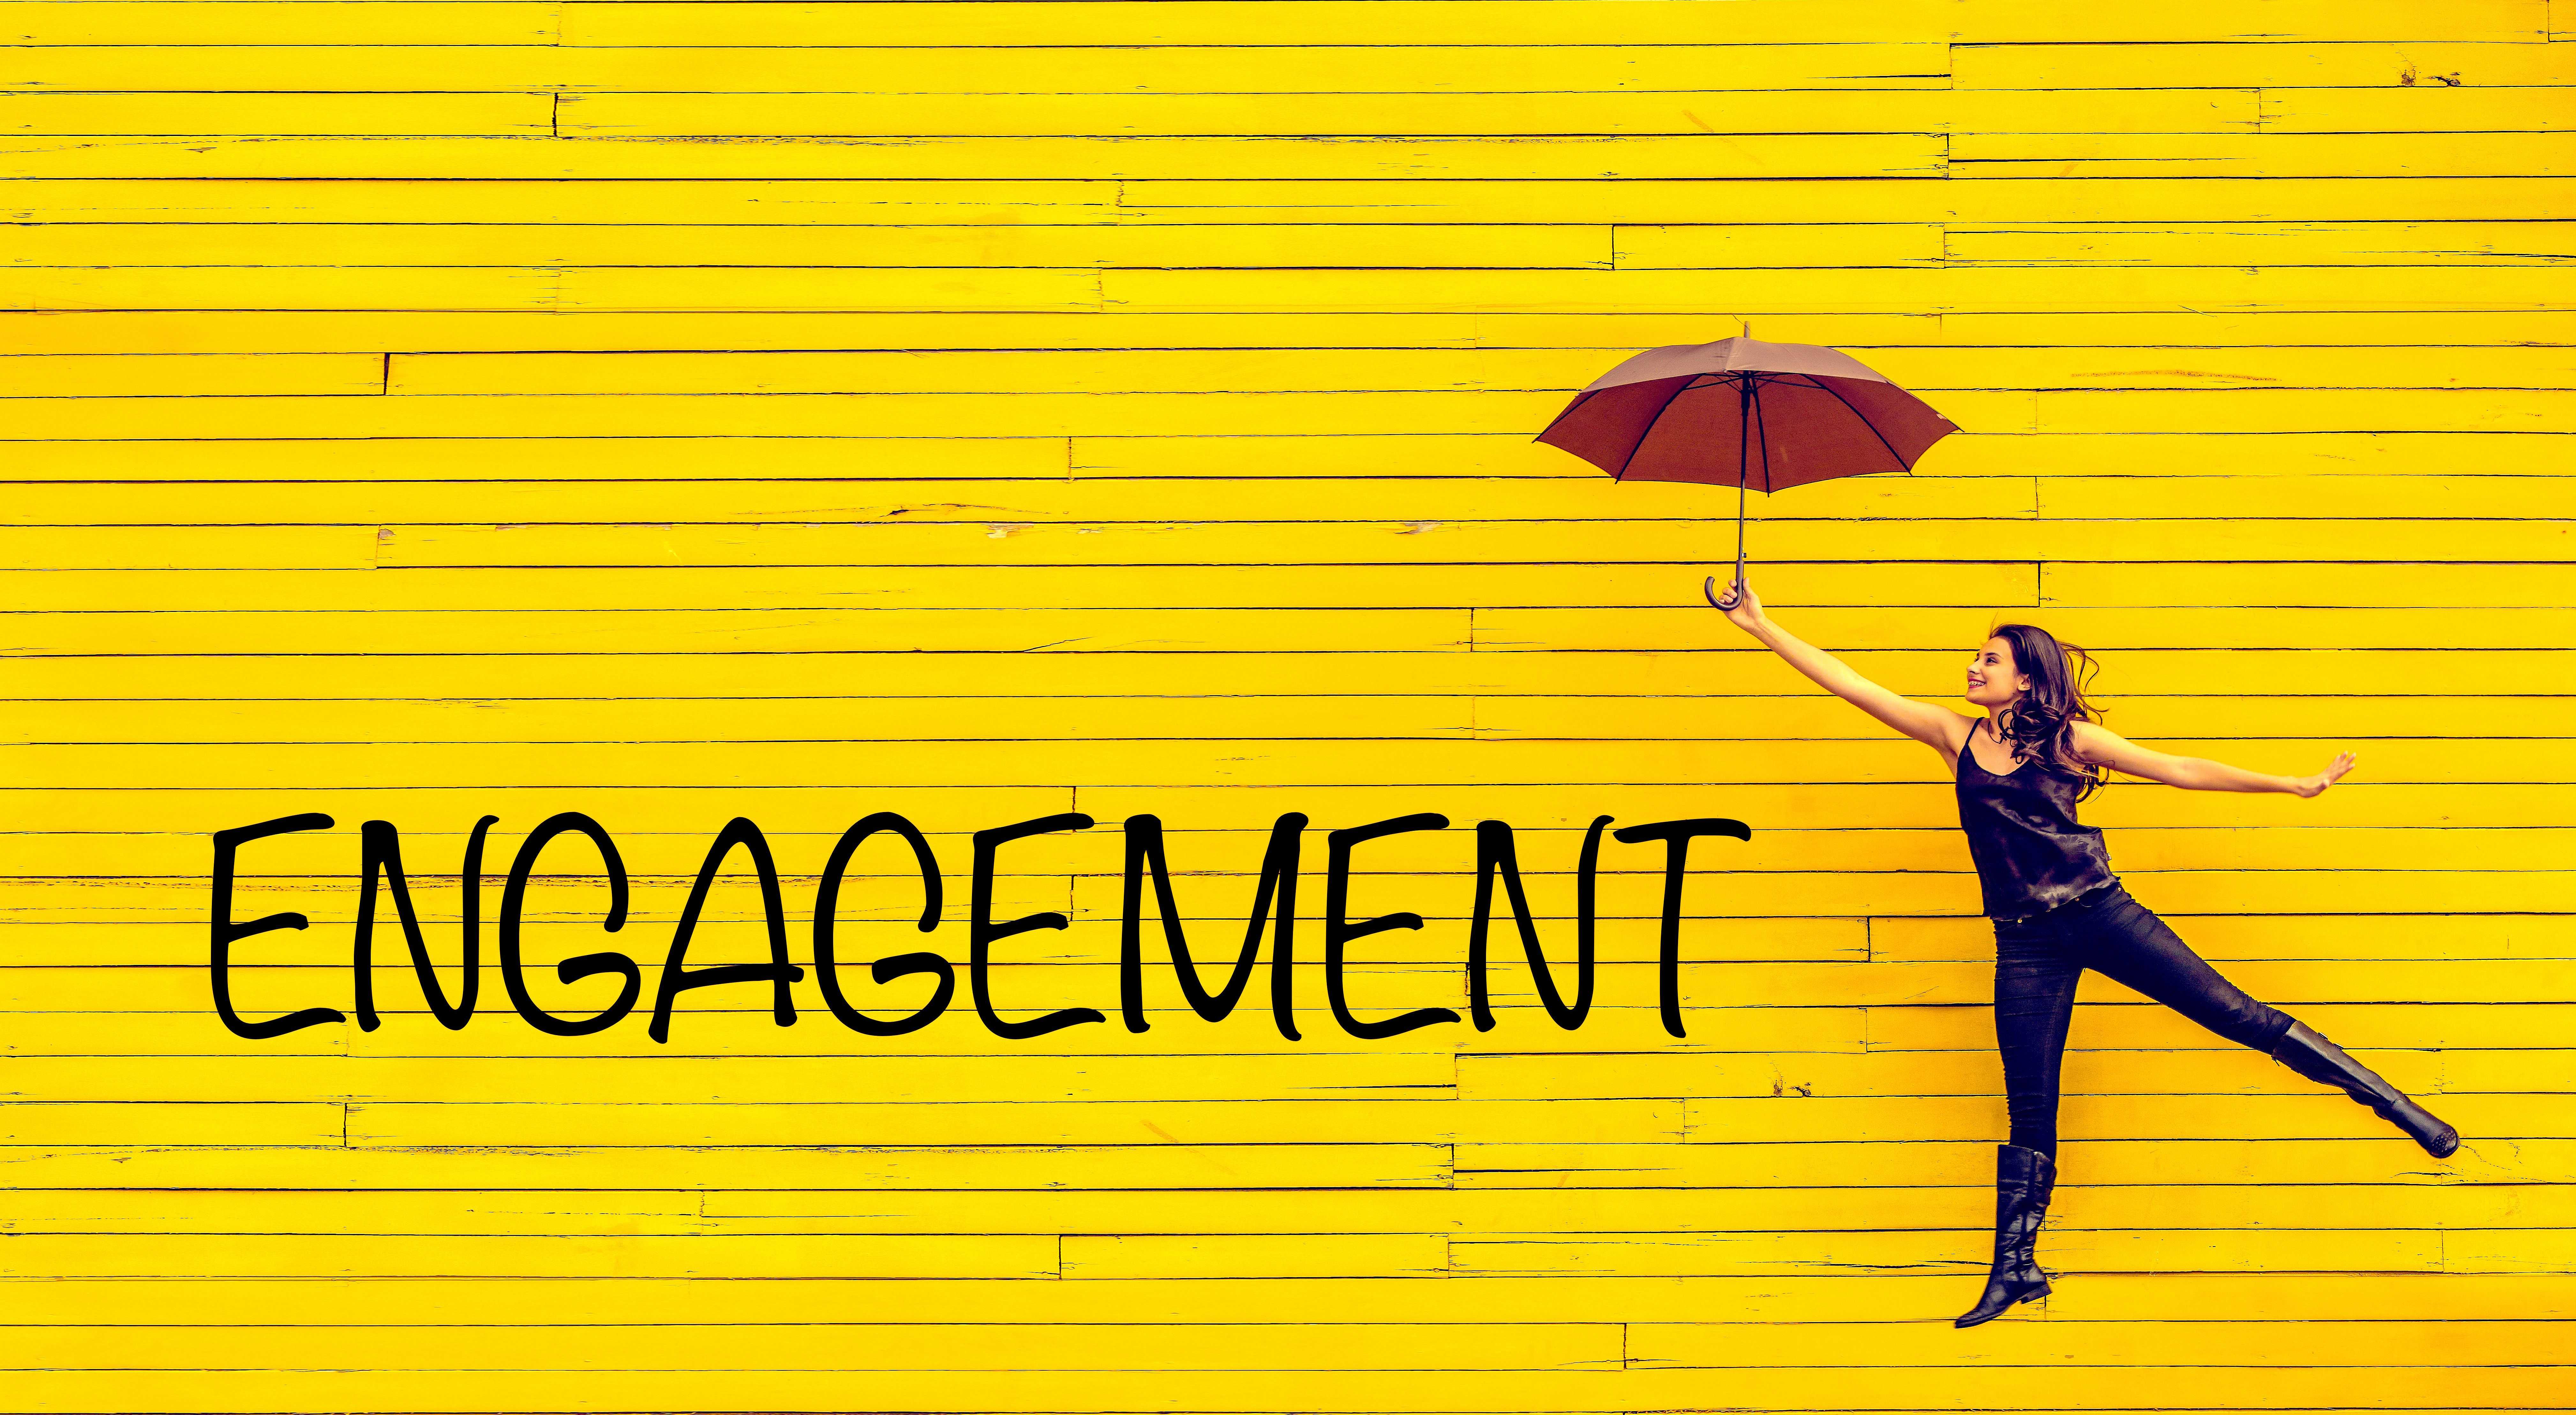 Engagement is not an act, but a habit